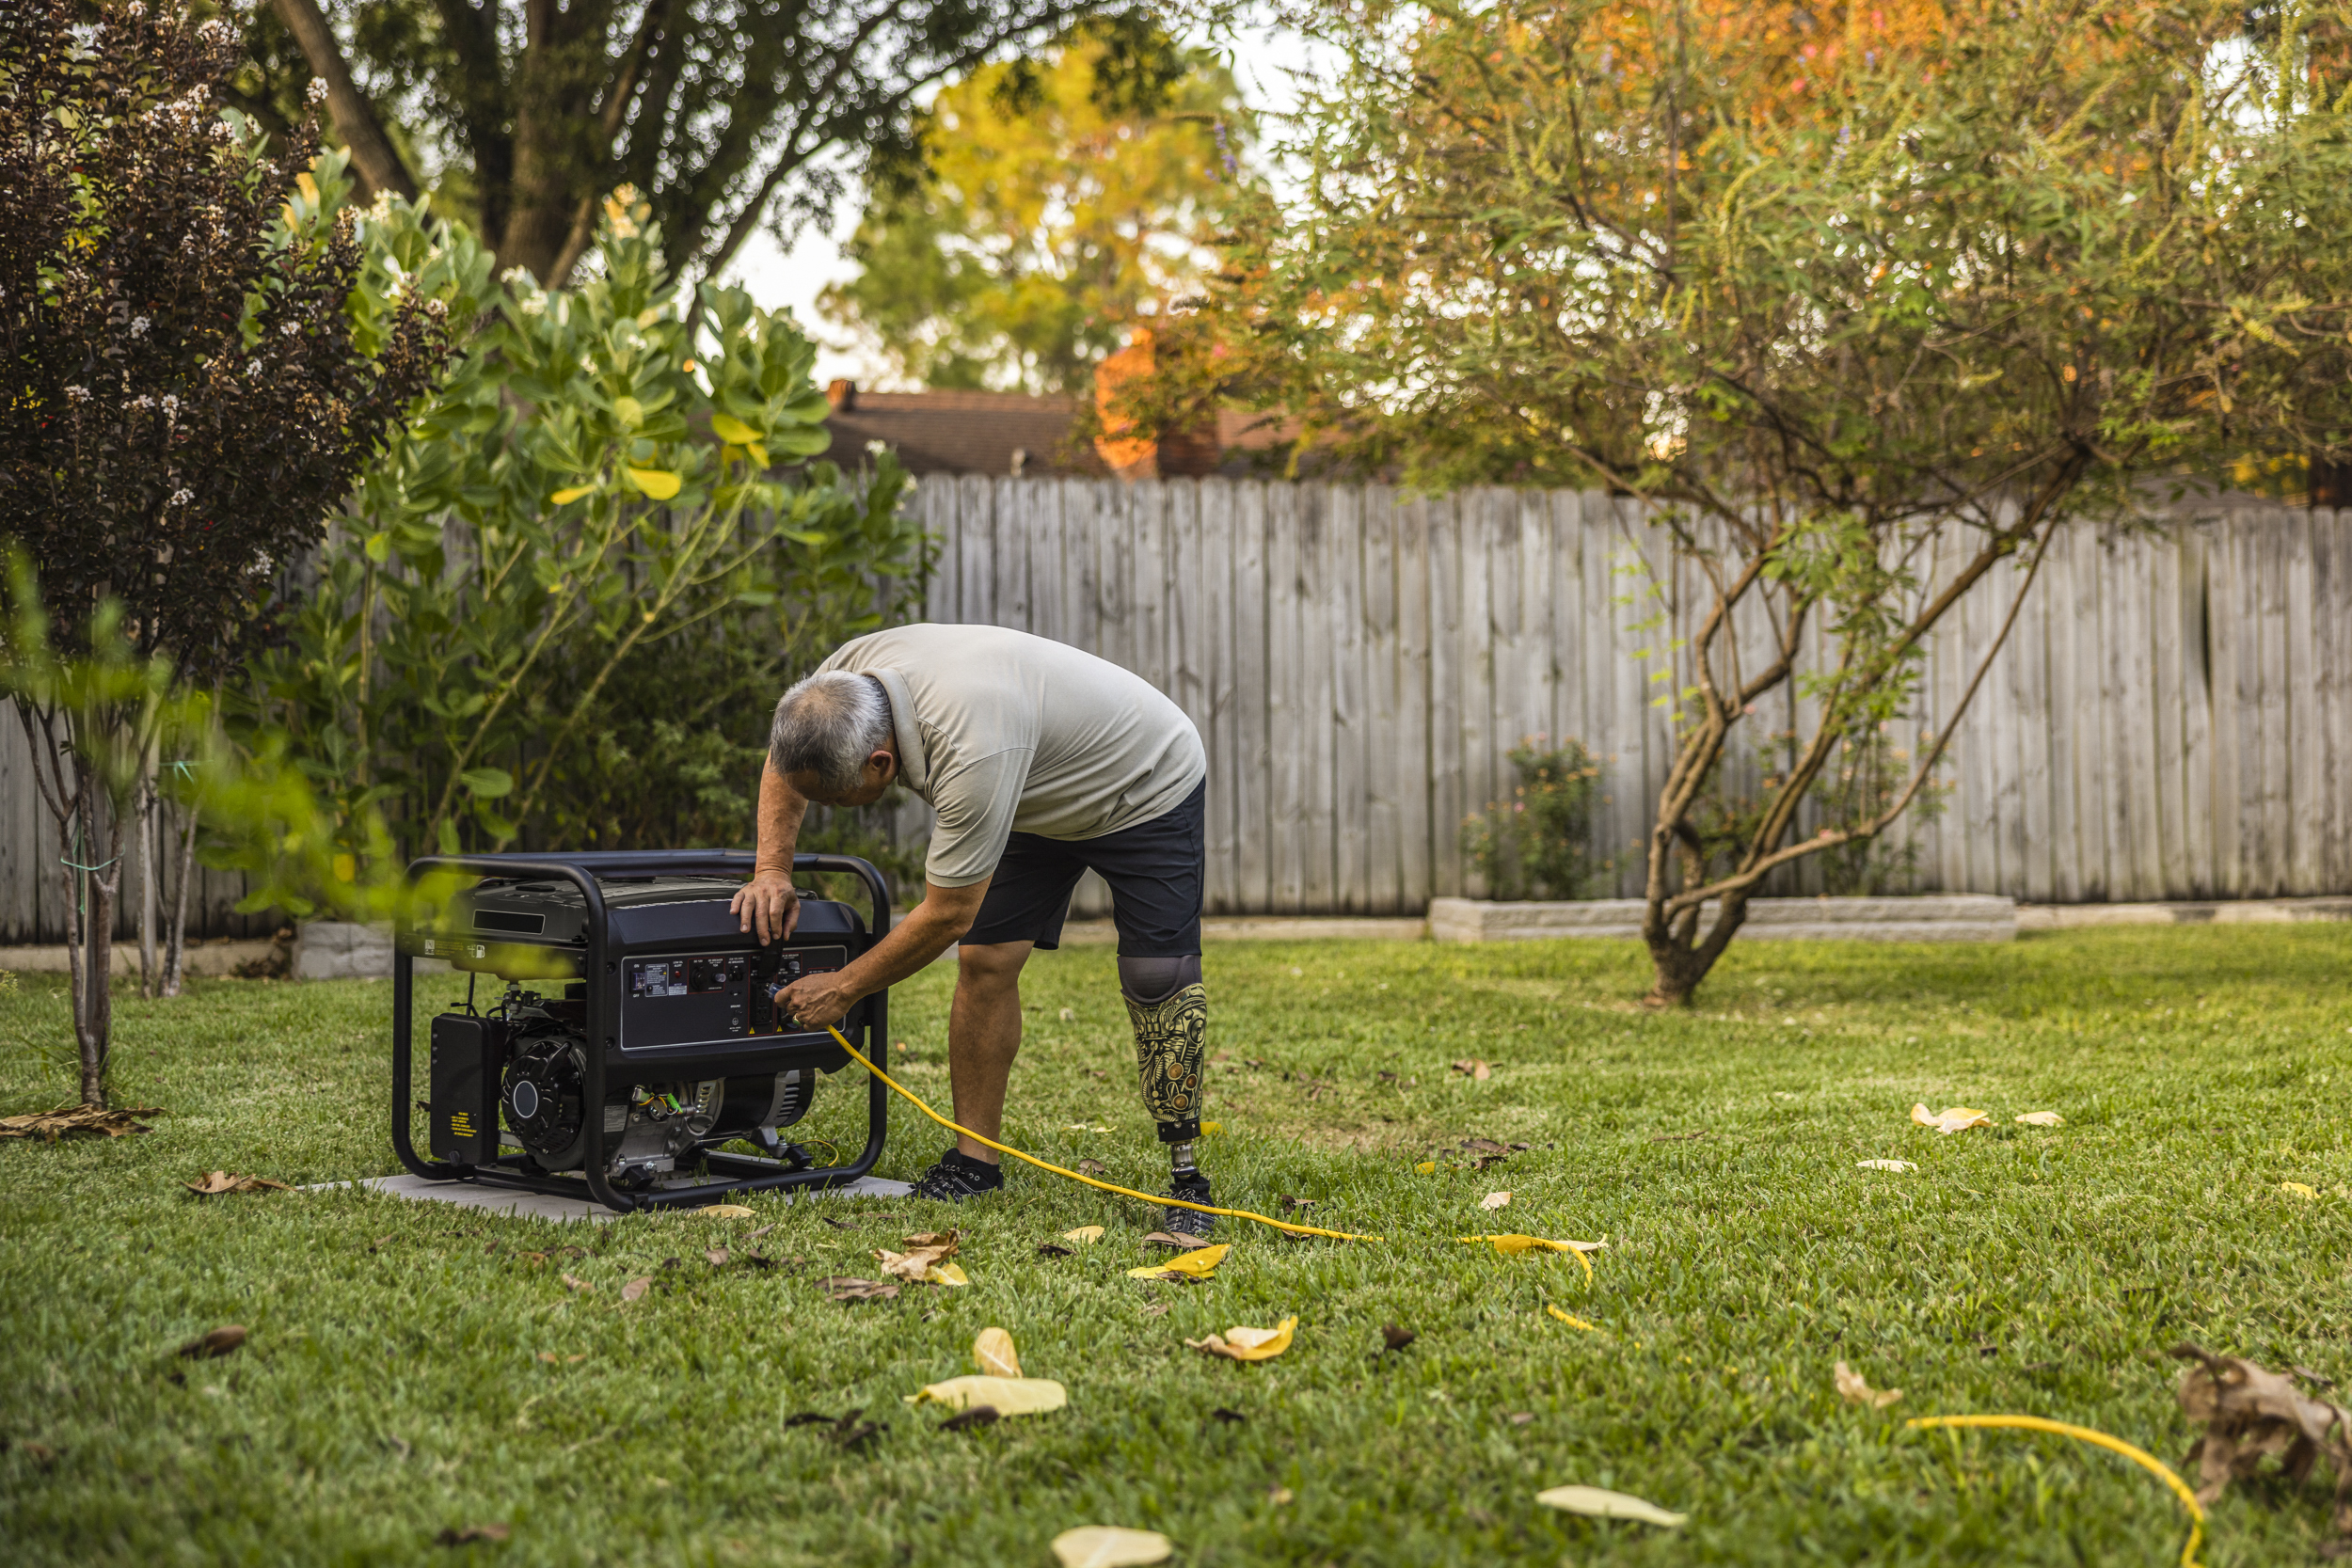 Carbon Monoxide Safety - Person with a prosthetic leg safely installing a portable generator.